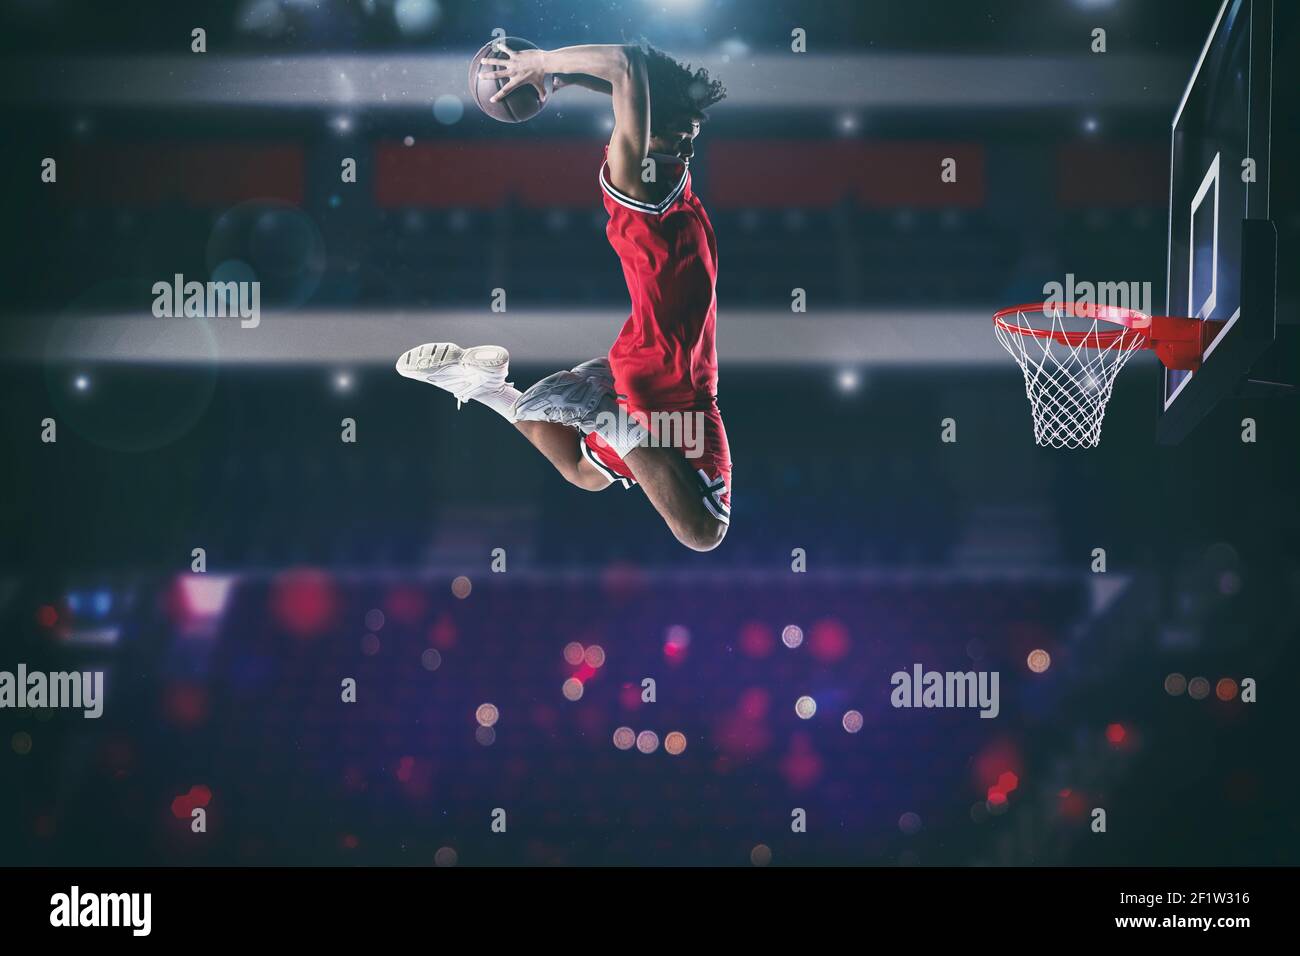 Basketball game with a high jump player to make a slam dunk to the basket Stock Photo